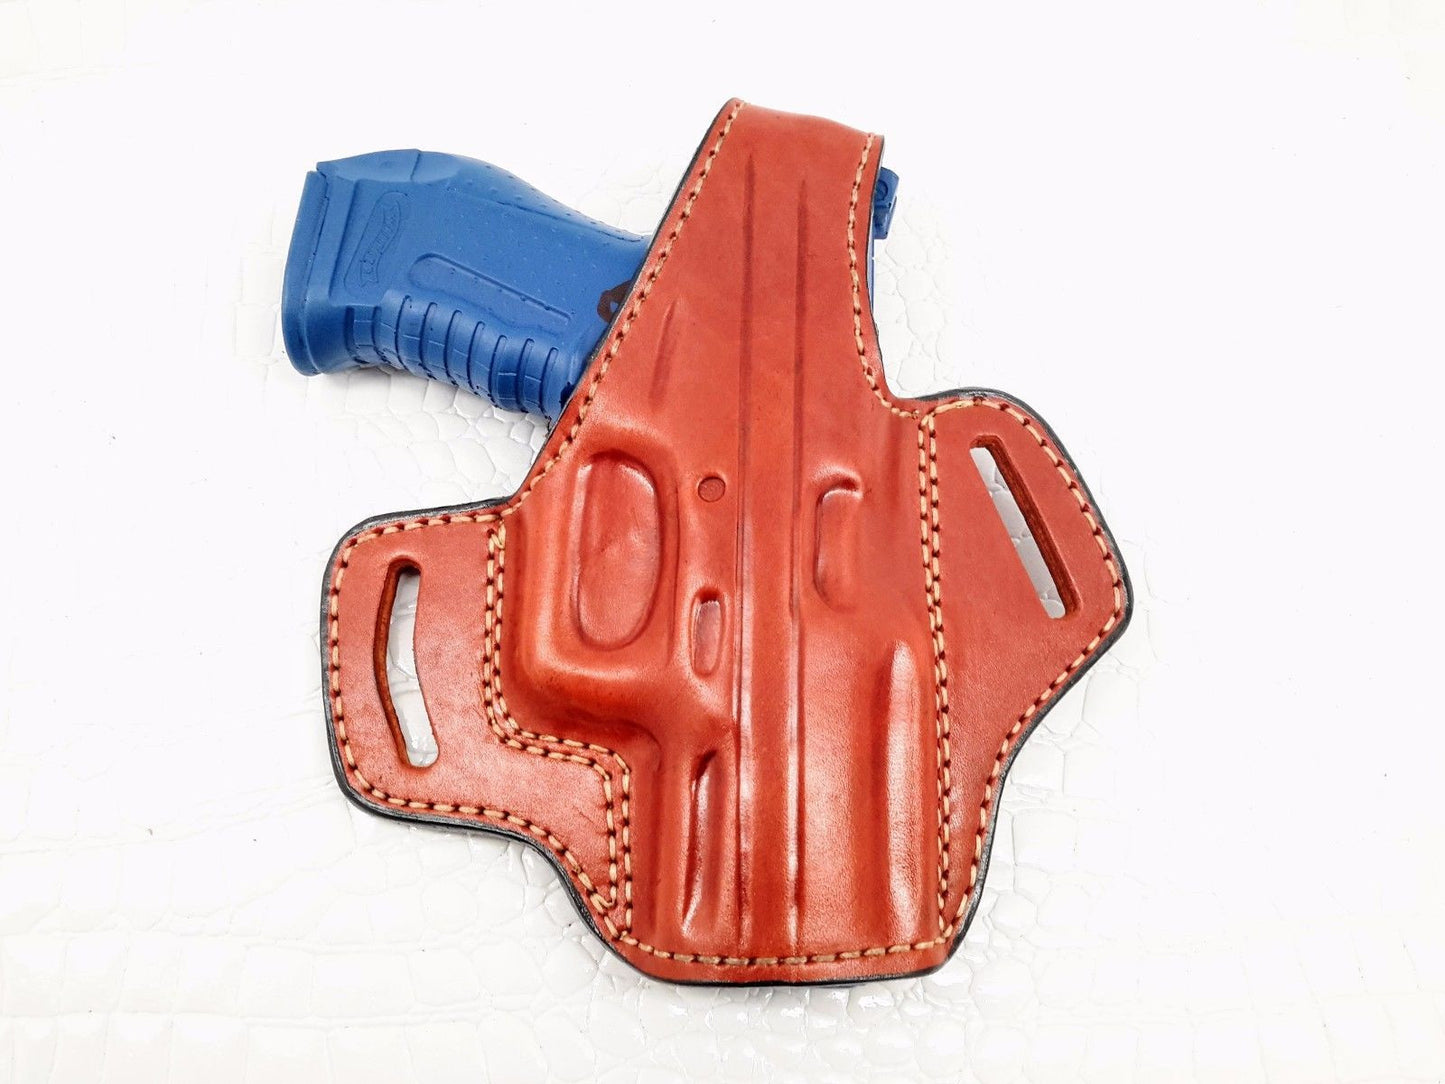 HK45 COMPACT OWB Thumb Break Leather Belt Holster - Choose your Color & Hand